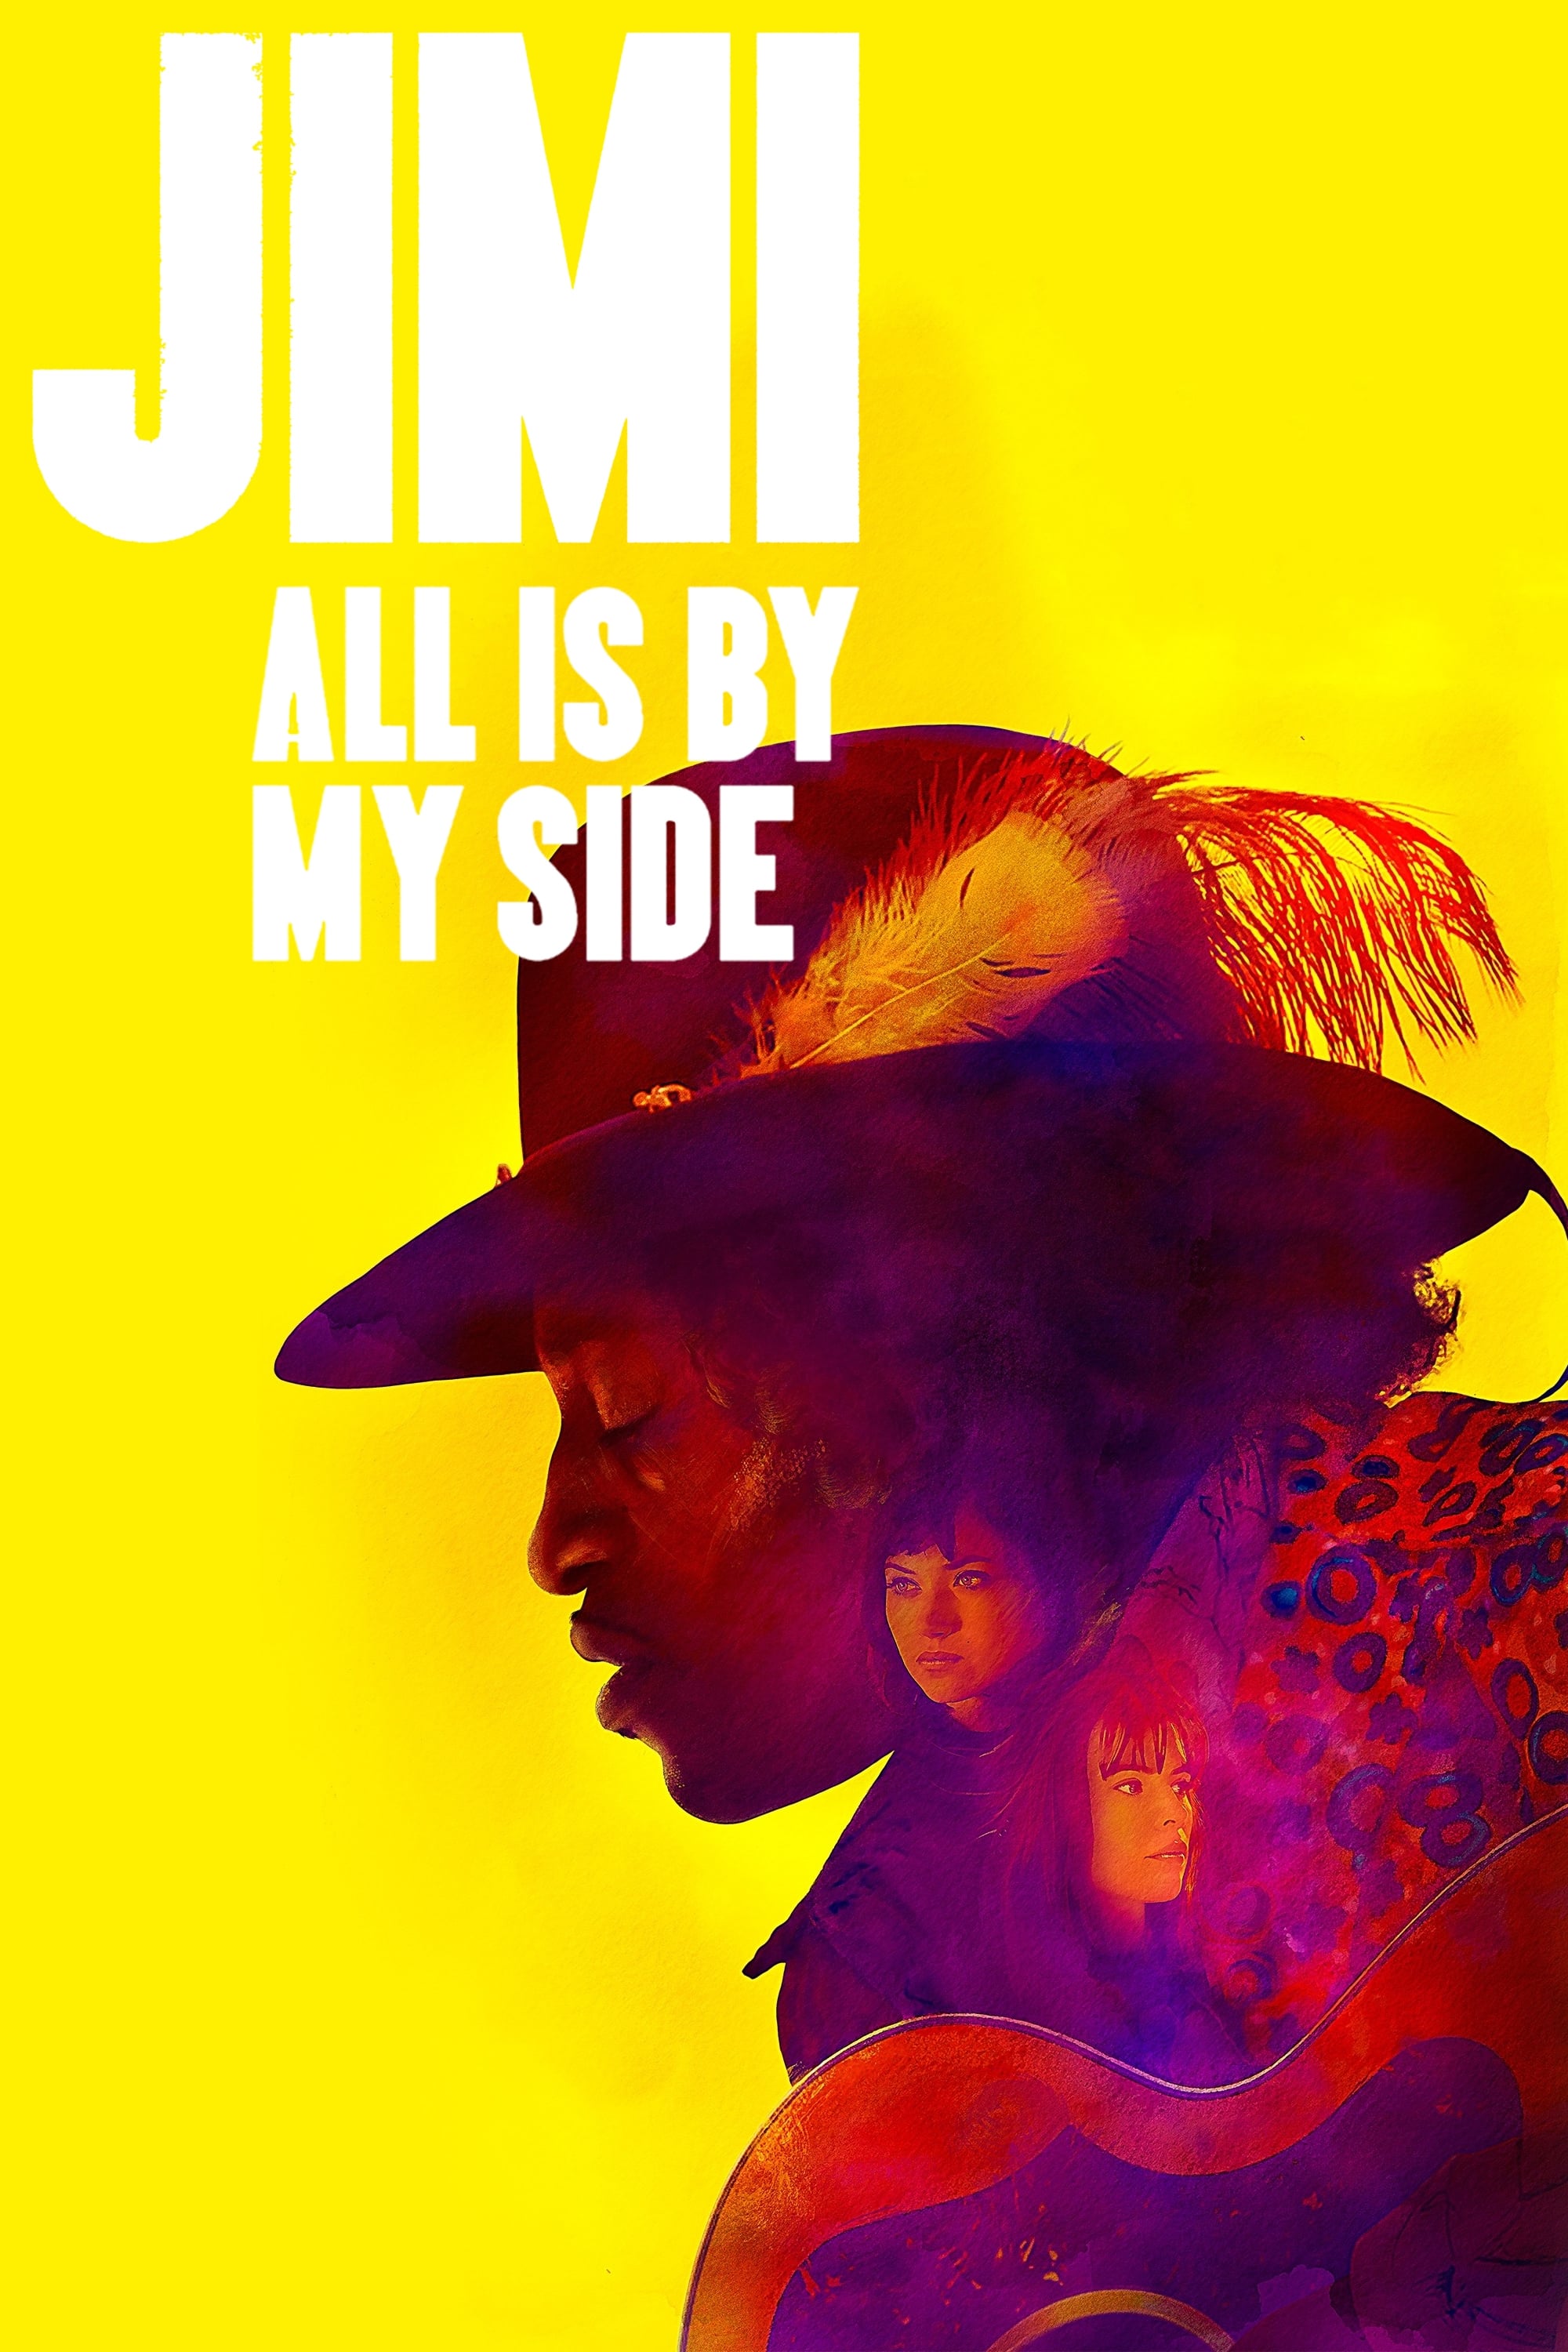 Jimi: All Is by My Side (2013)